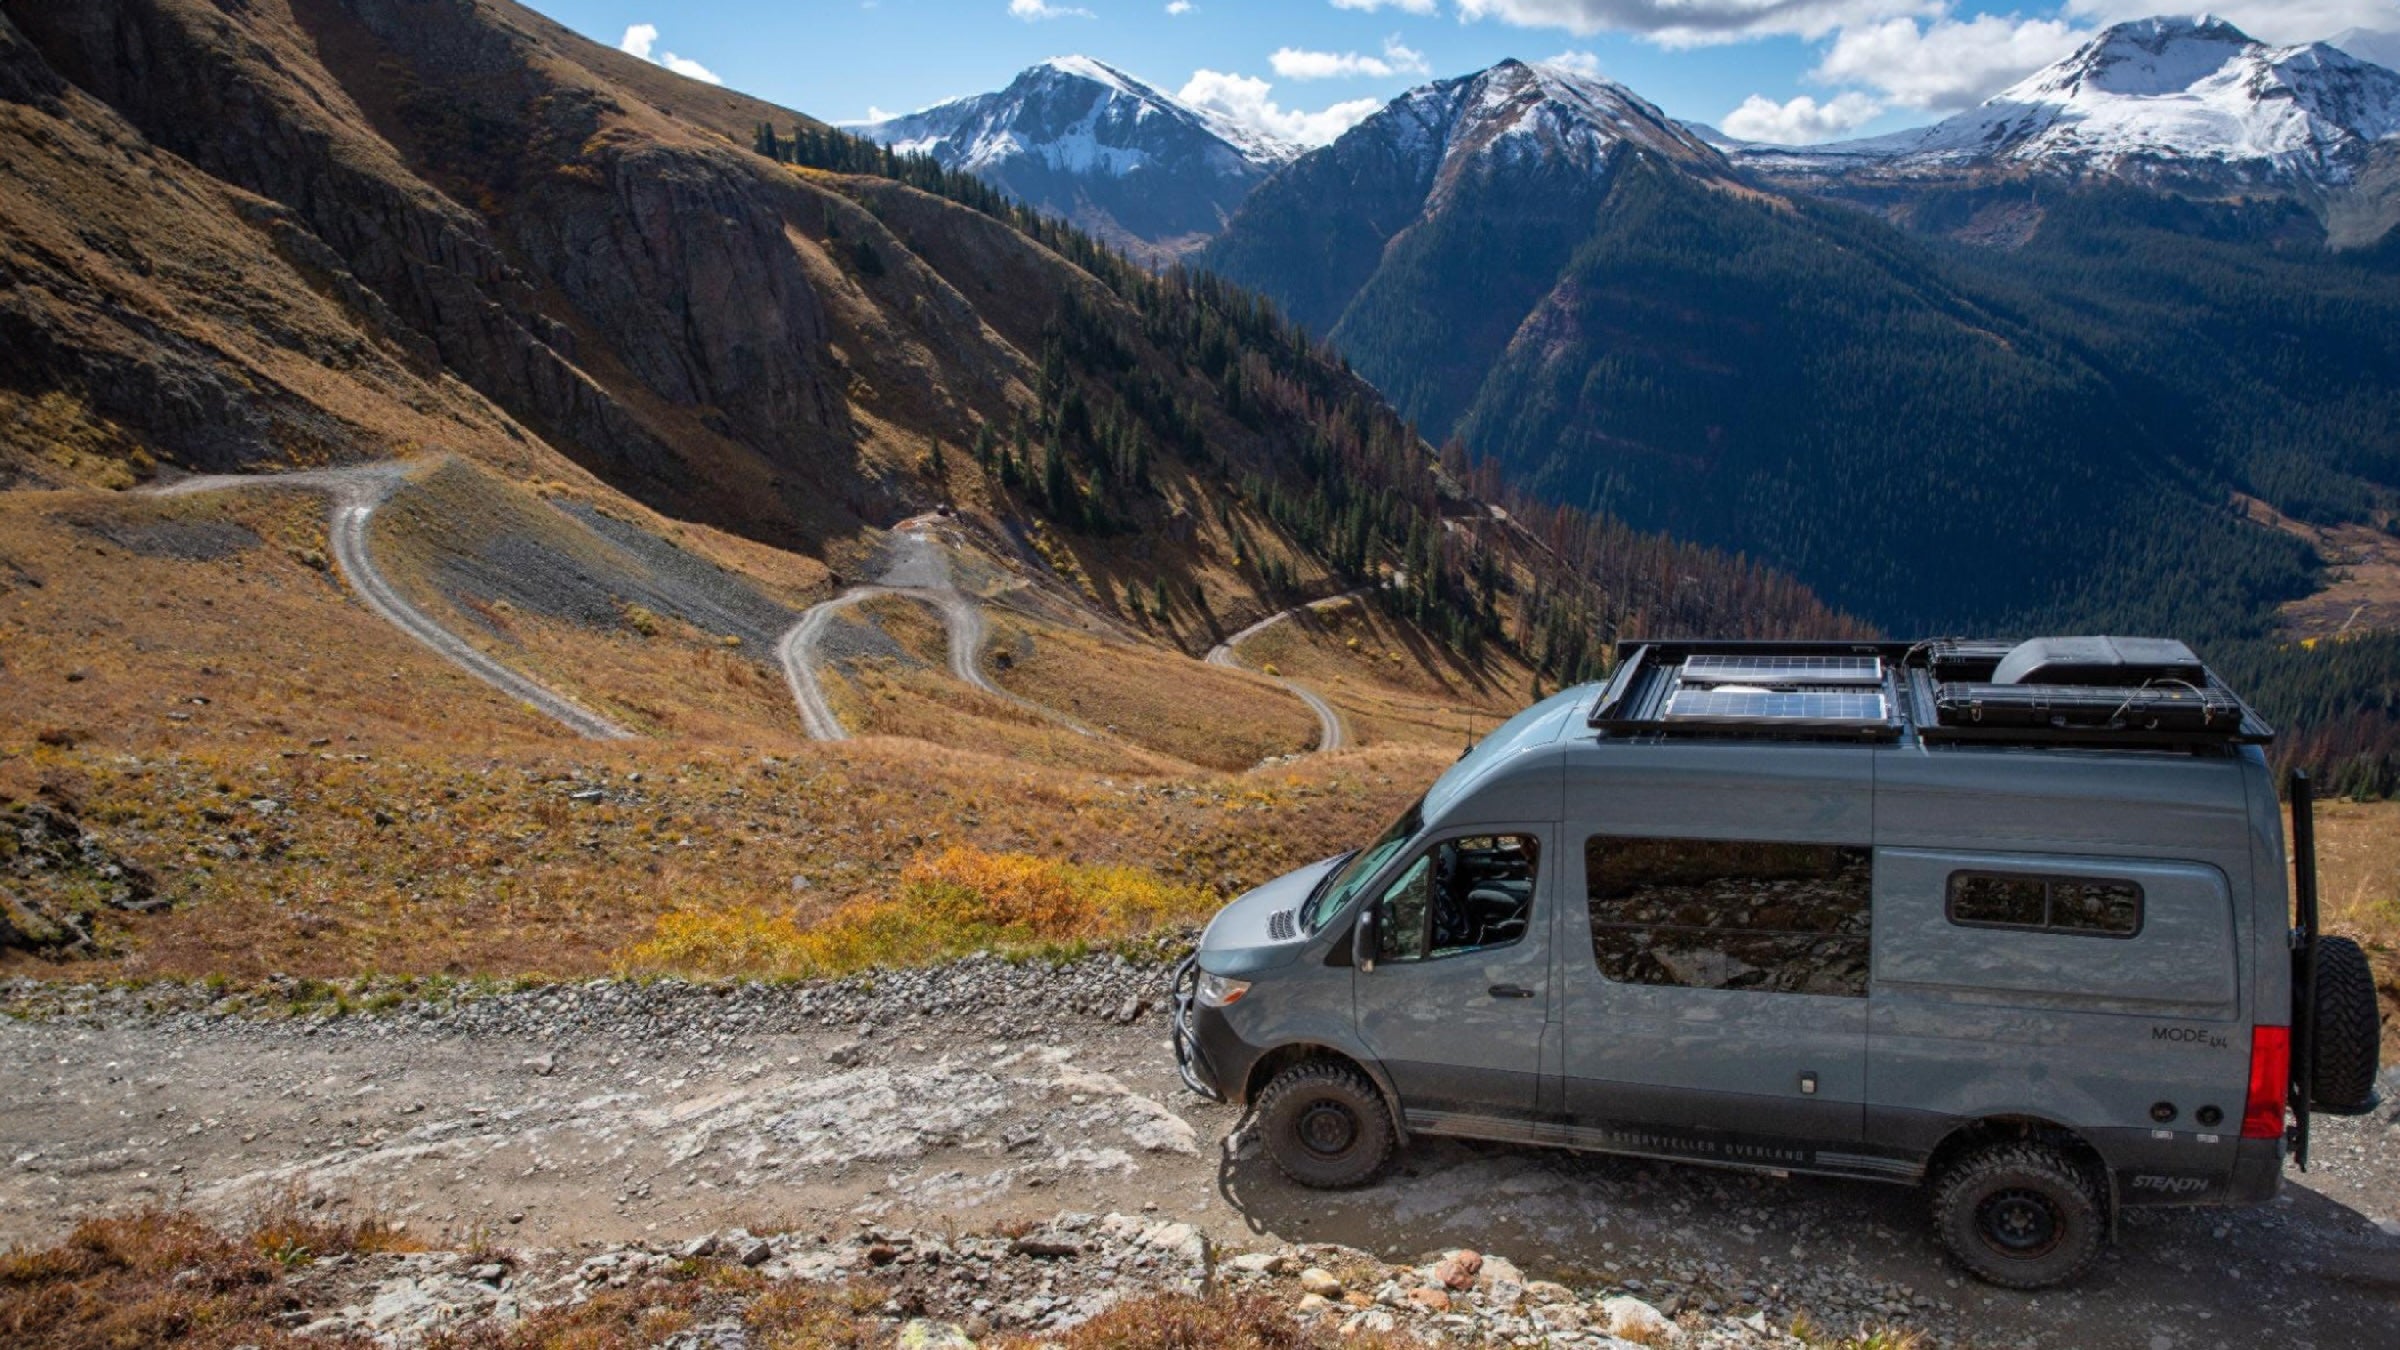 Grey 4x4 van on non-paved mountain pass with mountain peaks in the background